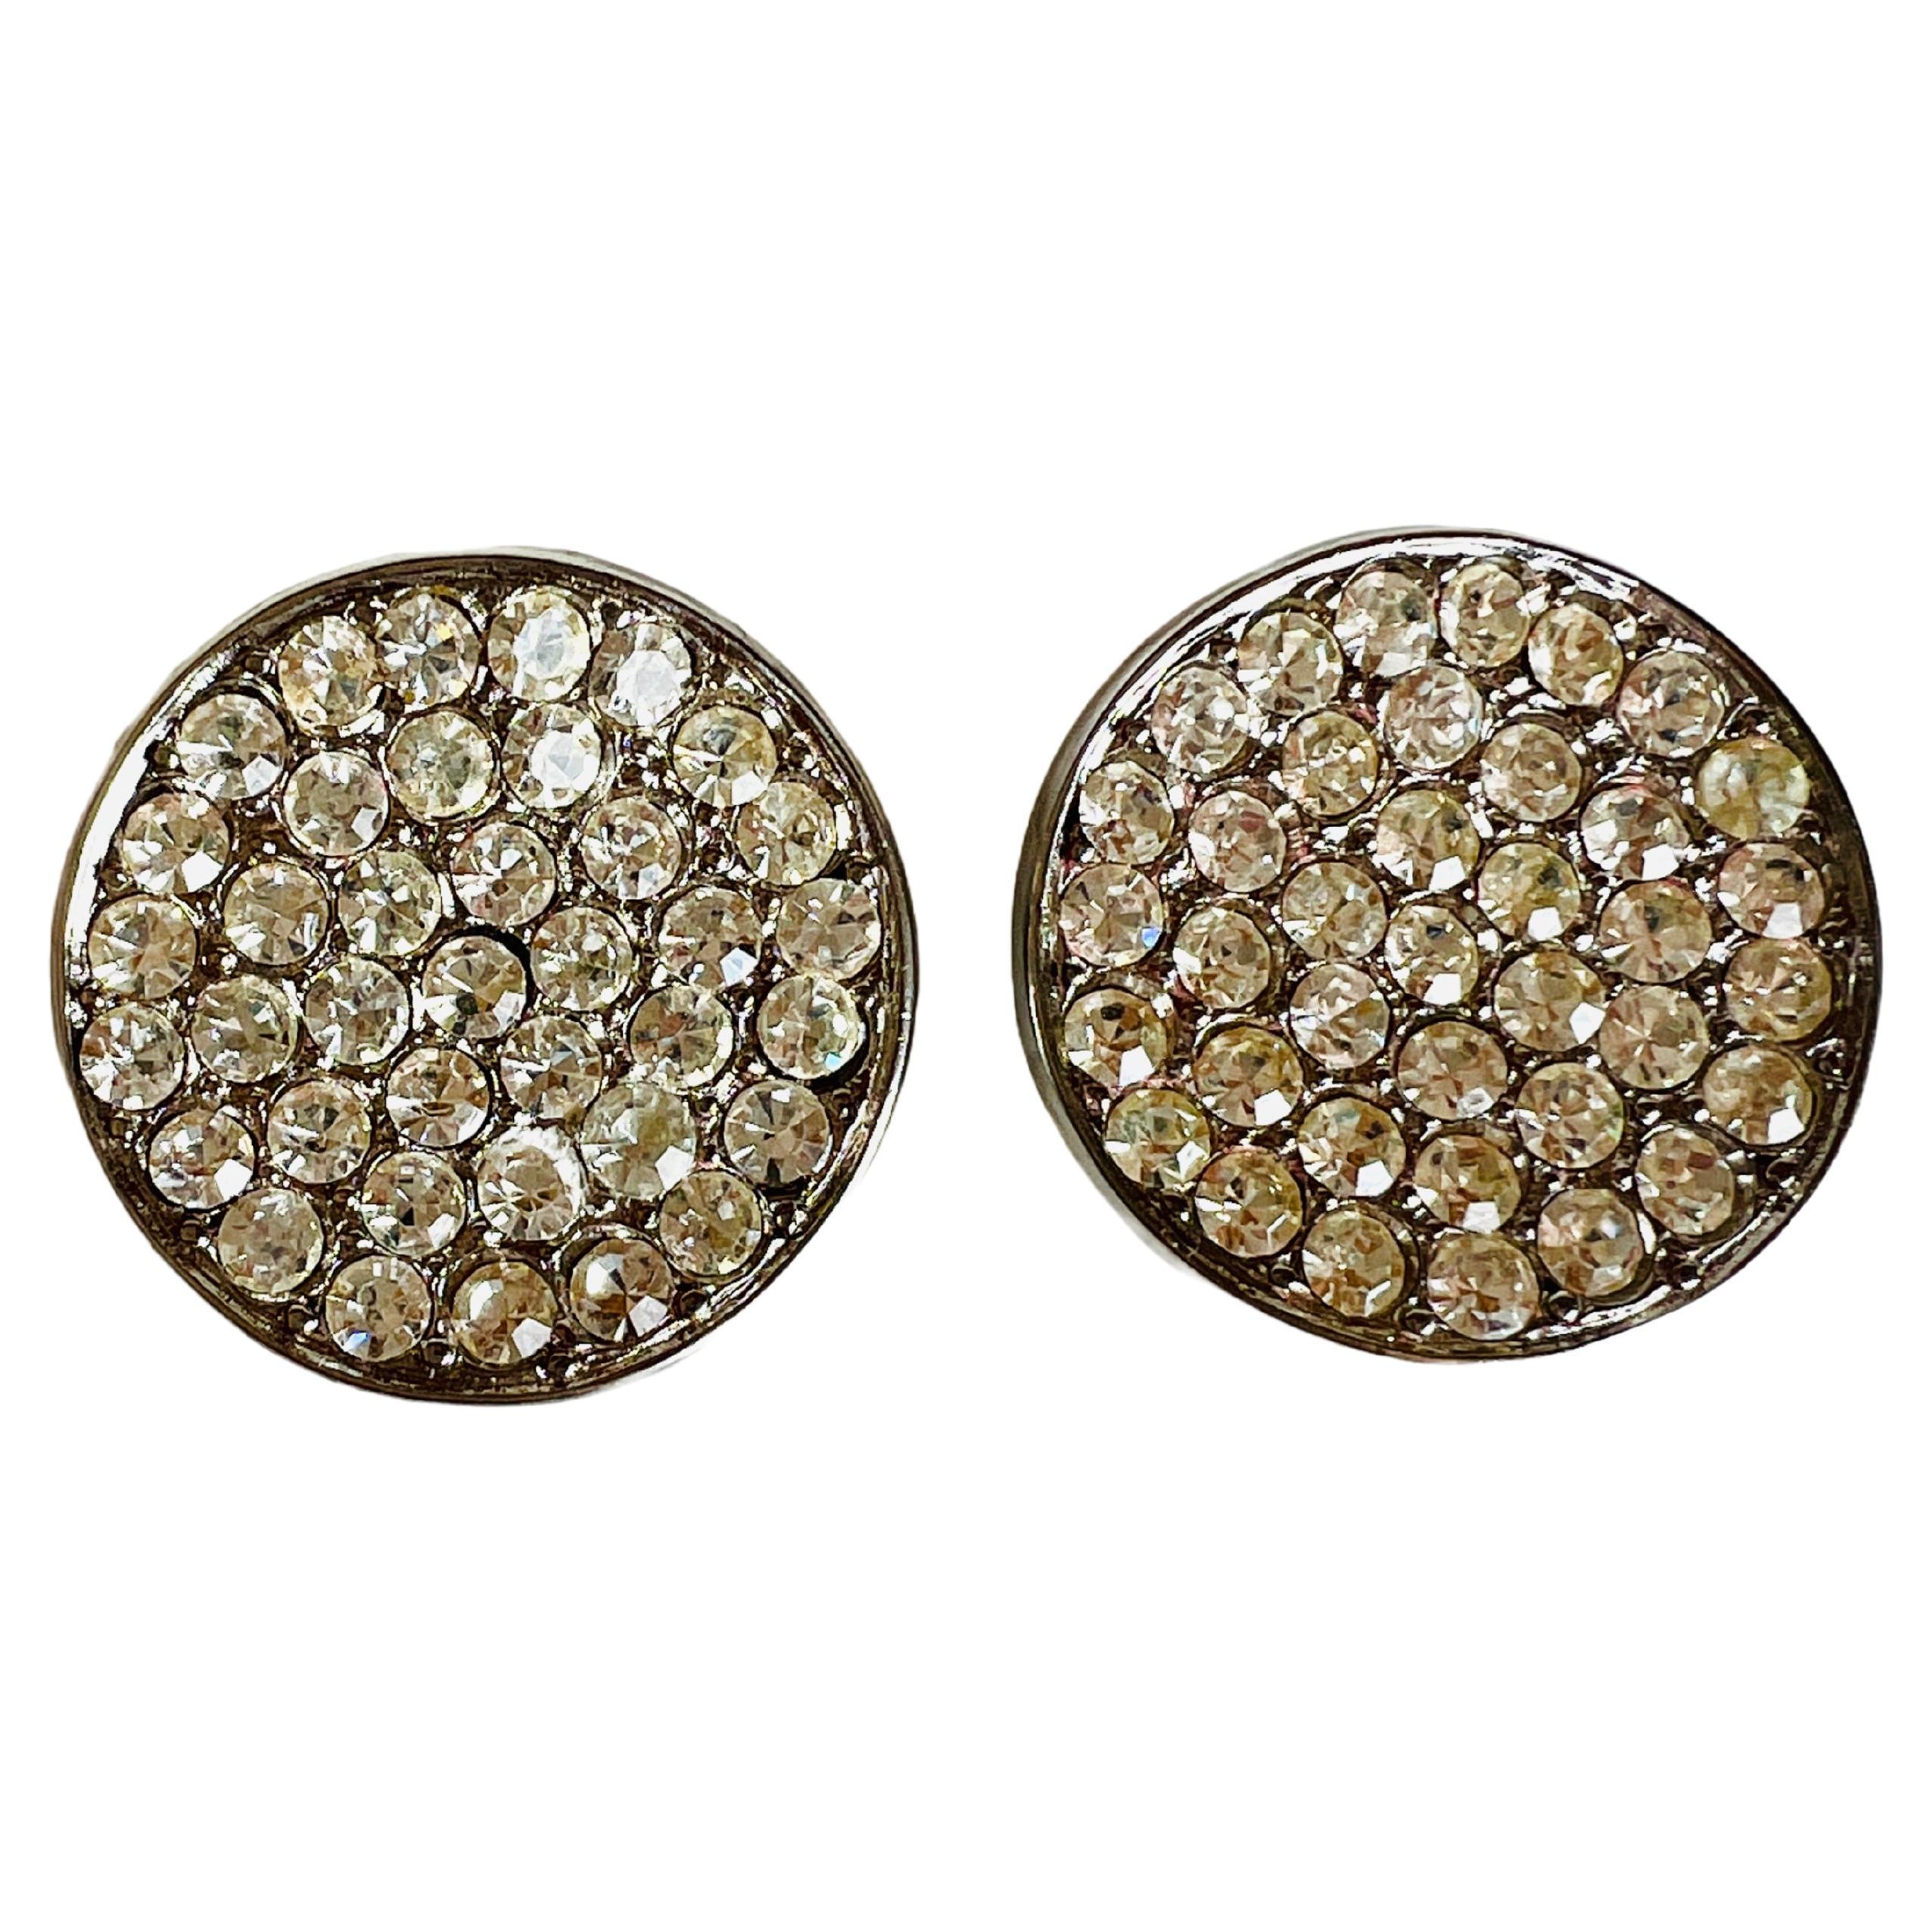 Pierre Cardin Rhinestone Silver Plated Arched Circular Clip on Earrings For Sale